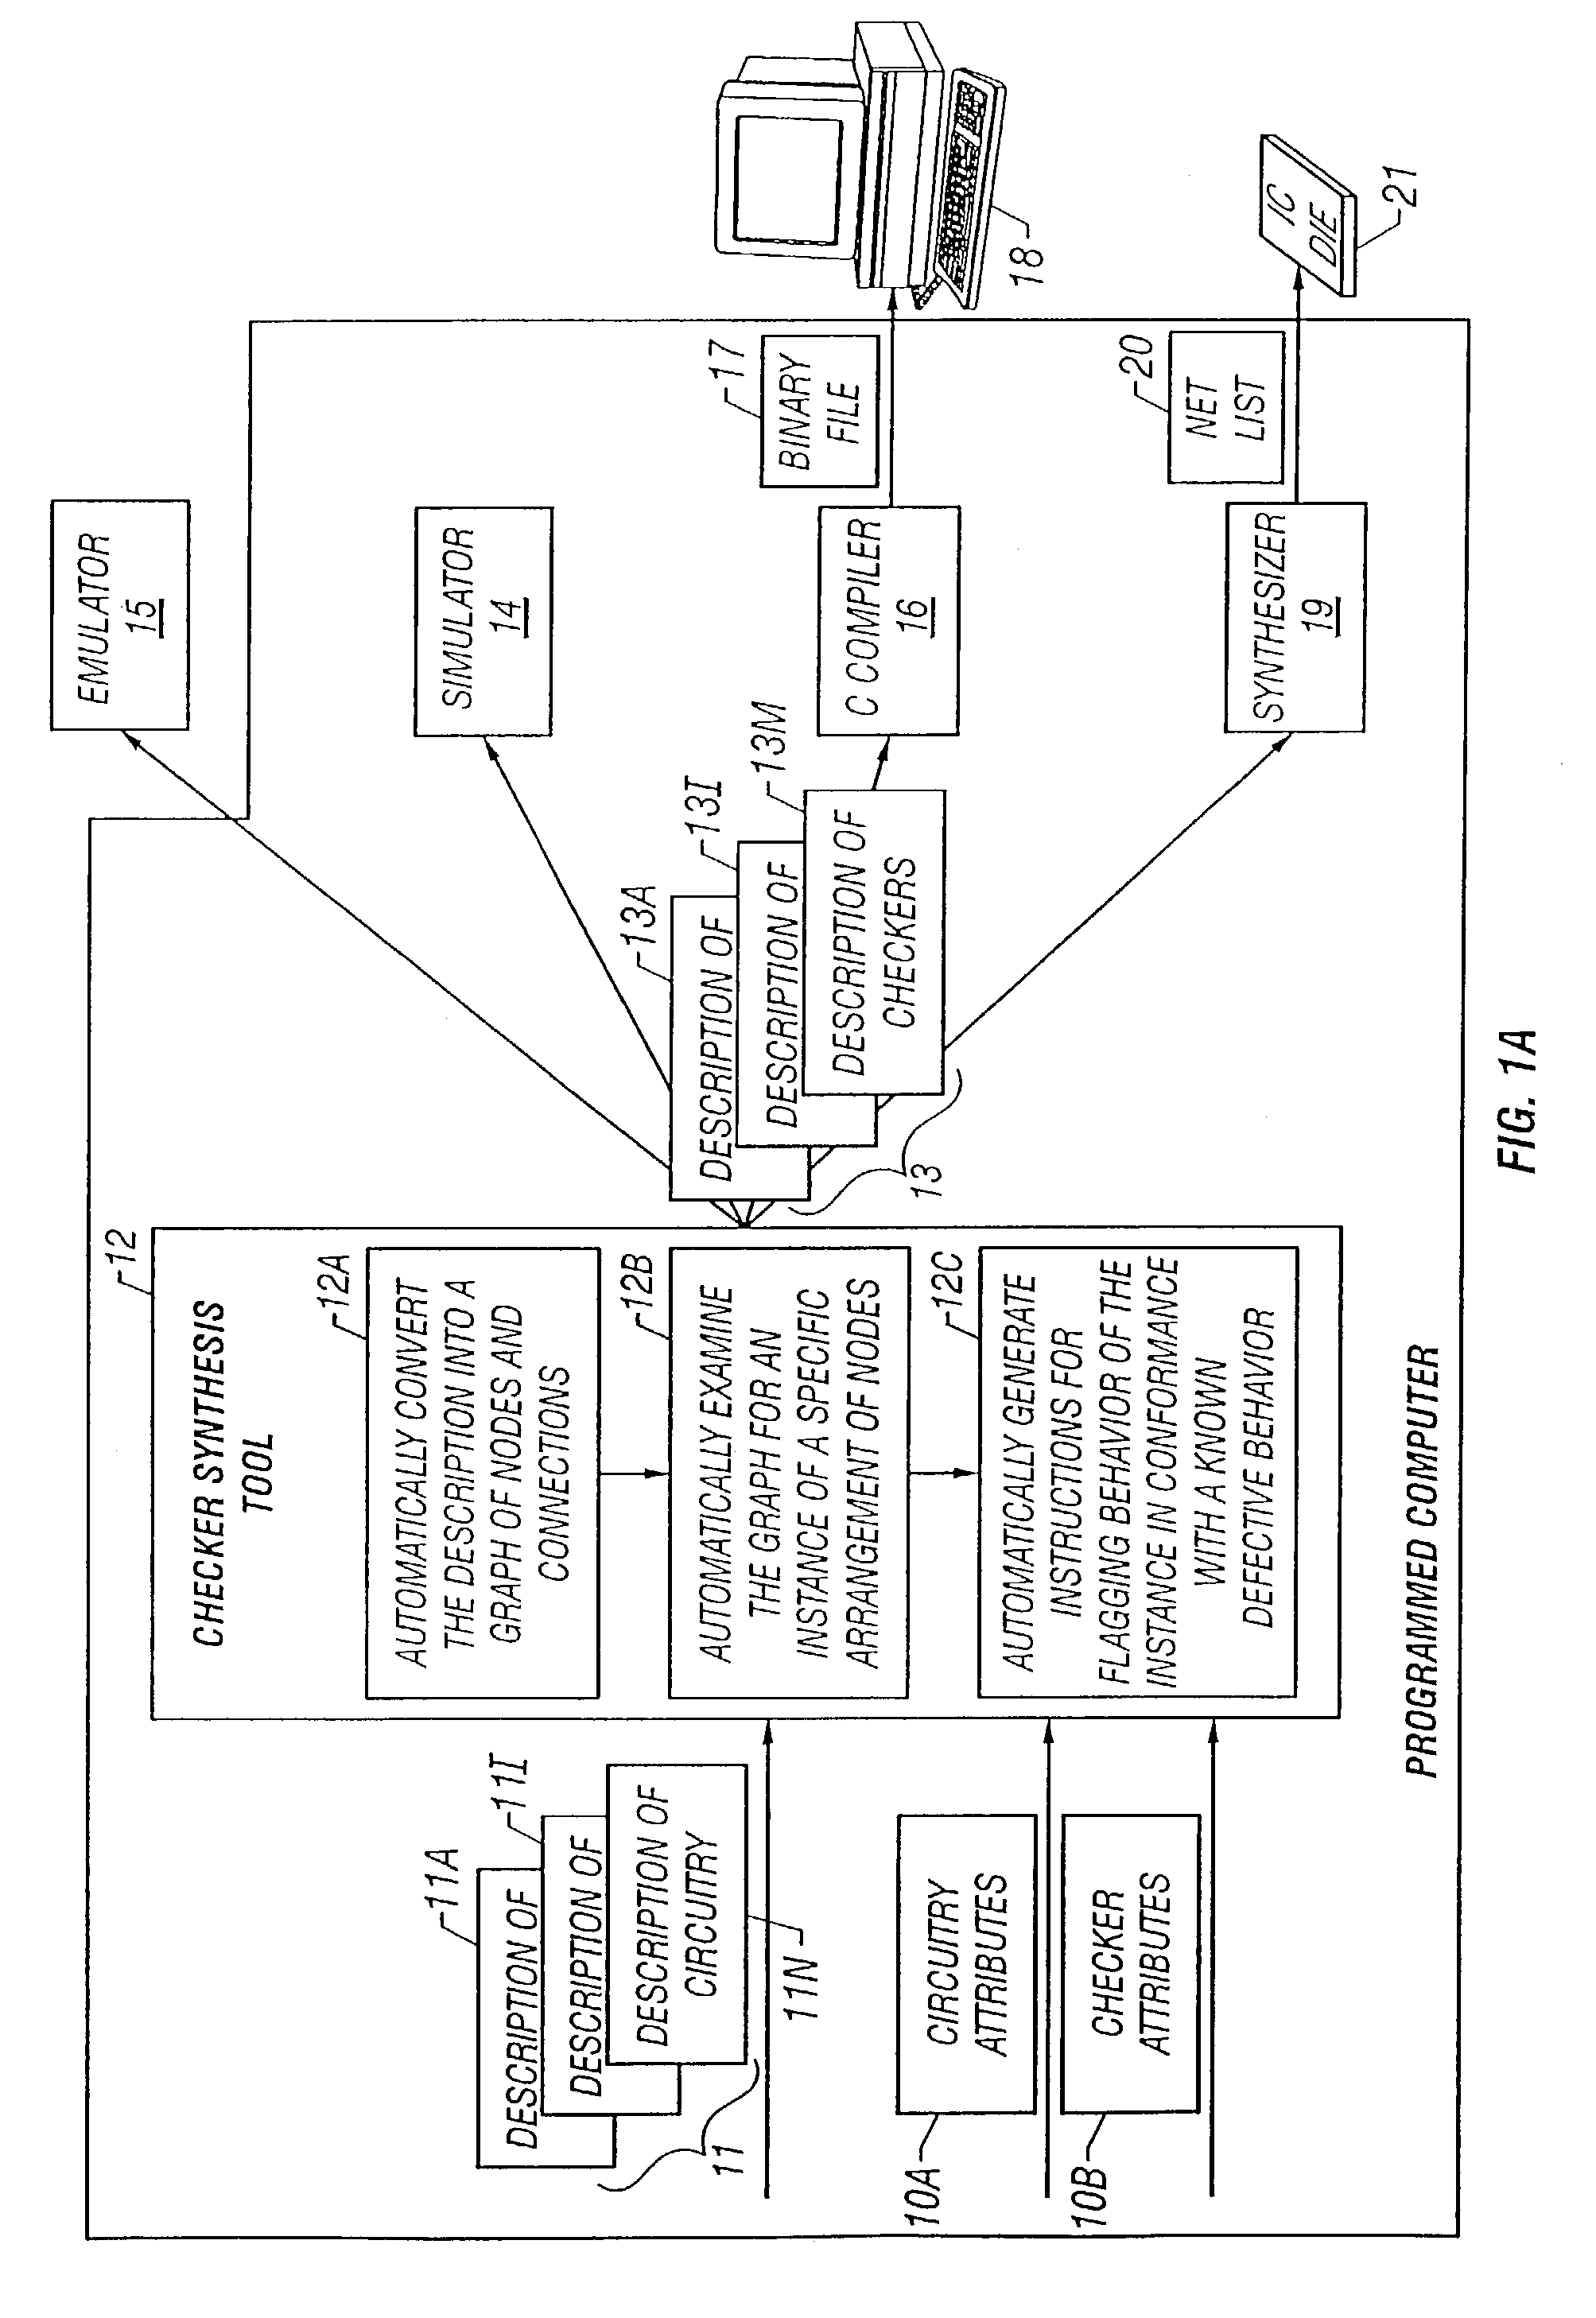 Method for automatically generating checkers for finding functional defects in a description of circuit